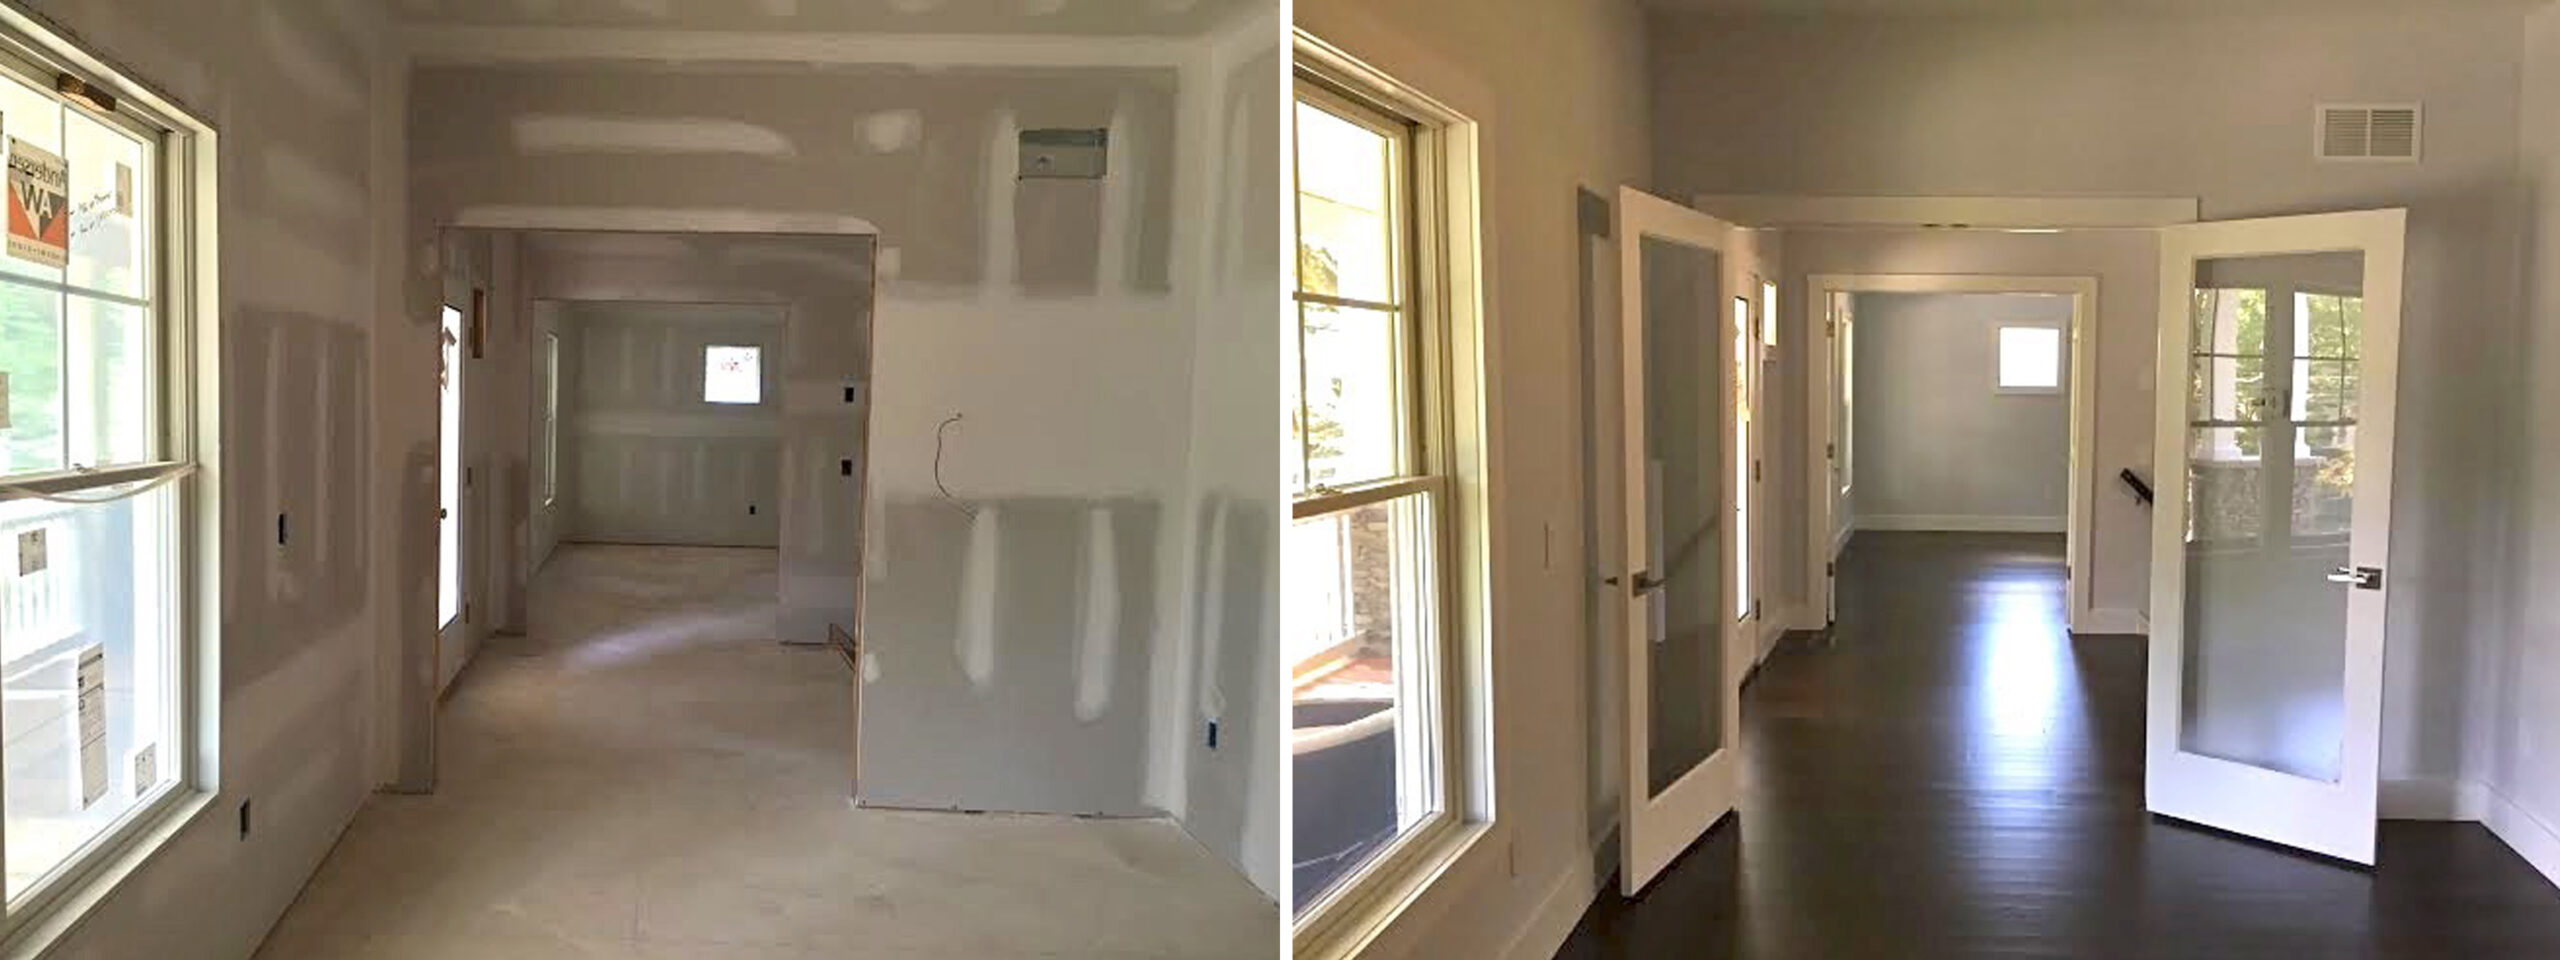 Interior Hallway painting before and after